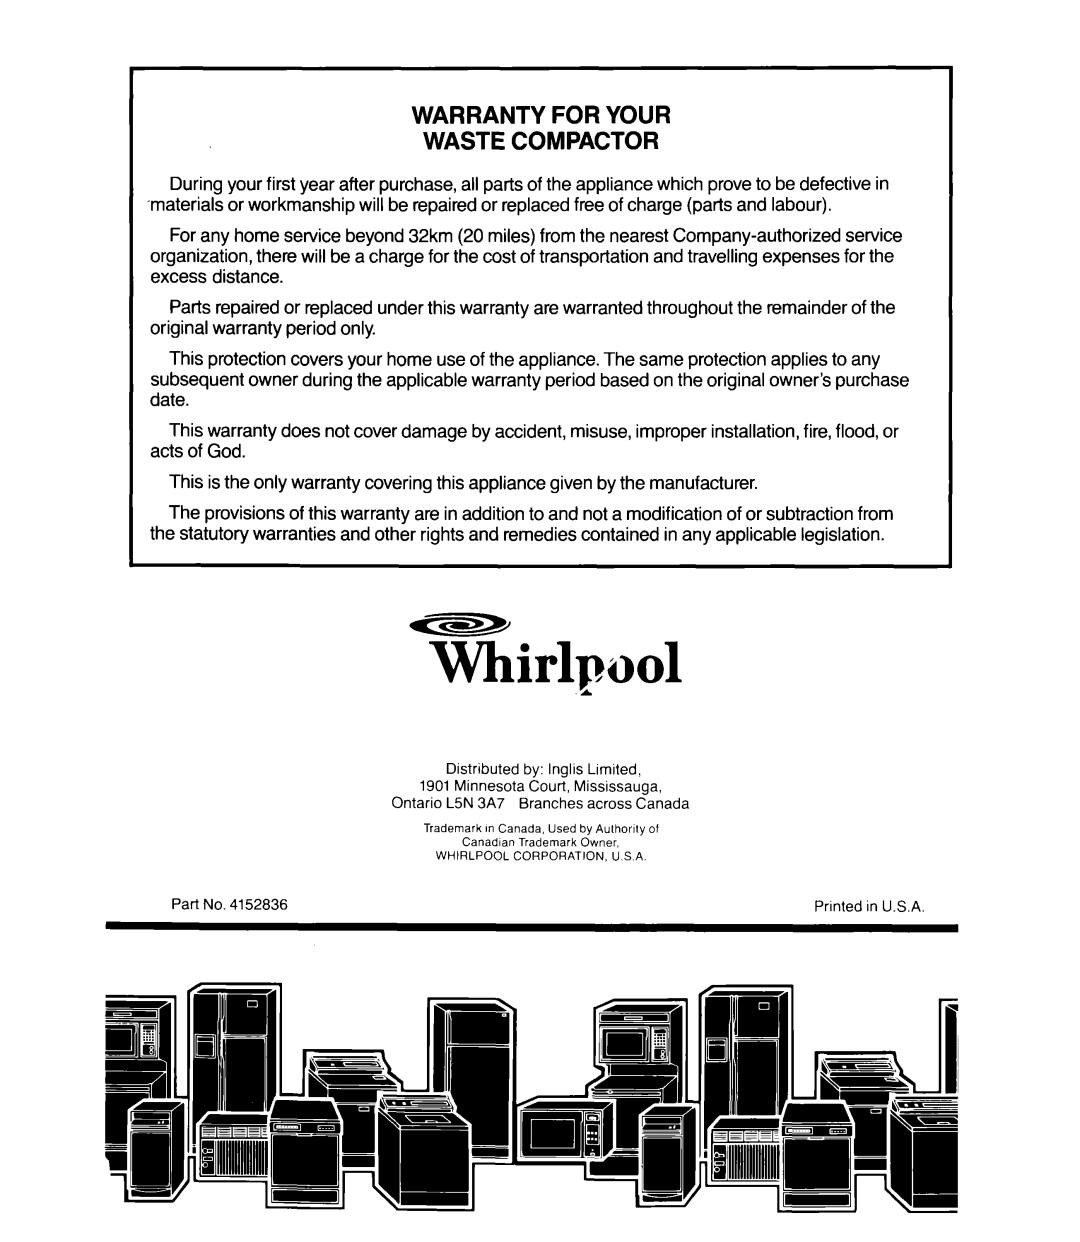 Whirlpool TU 4100, TU 8100, TF 4600 manual Warranty For Your Waste Compactor, Ontario L5N 3A7 Branches across Canada 